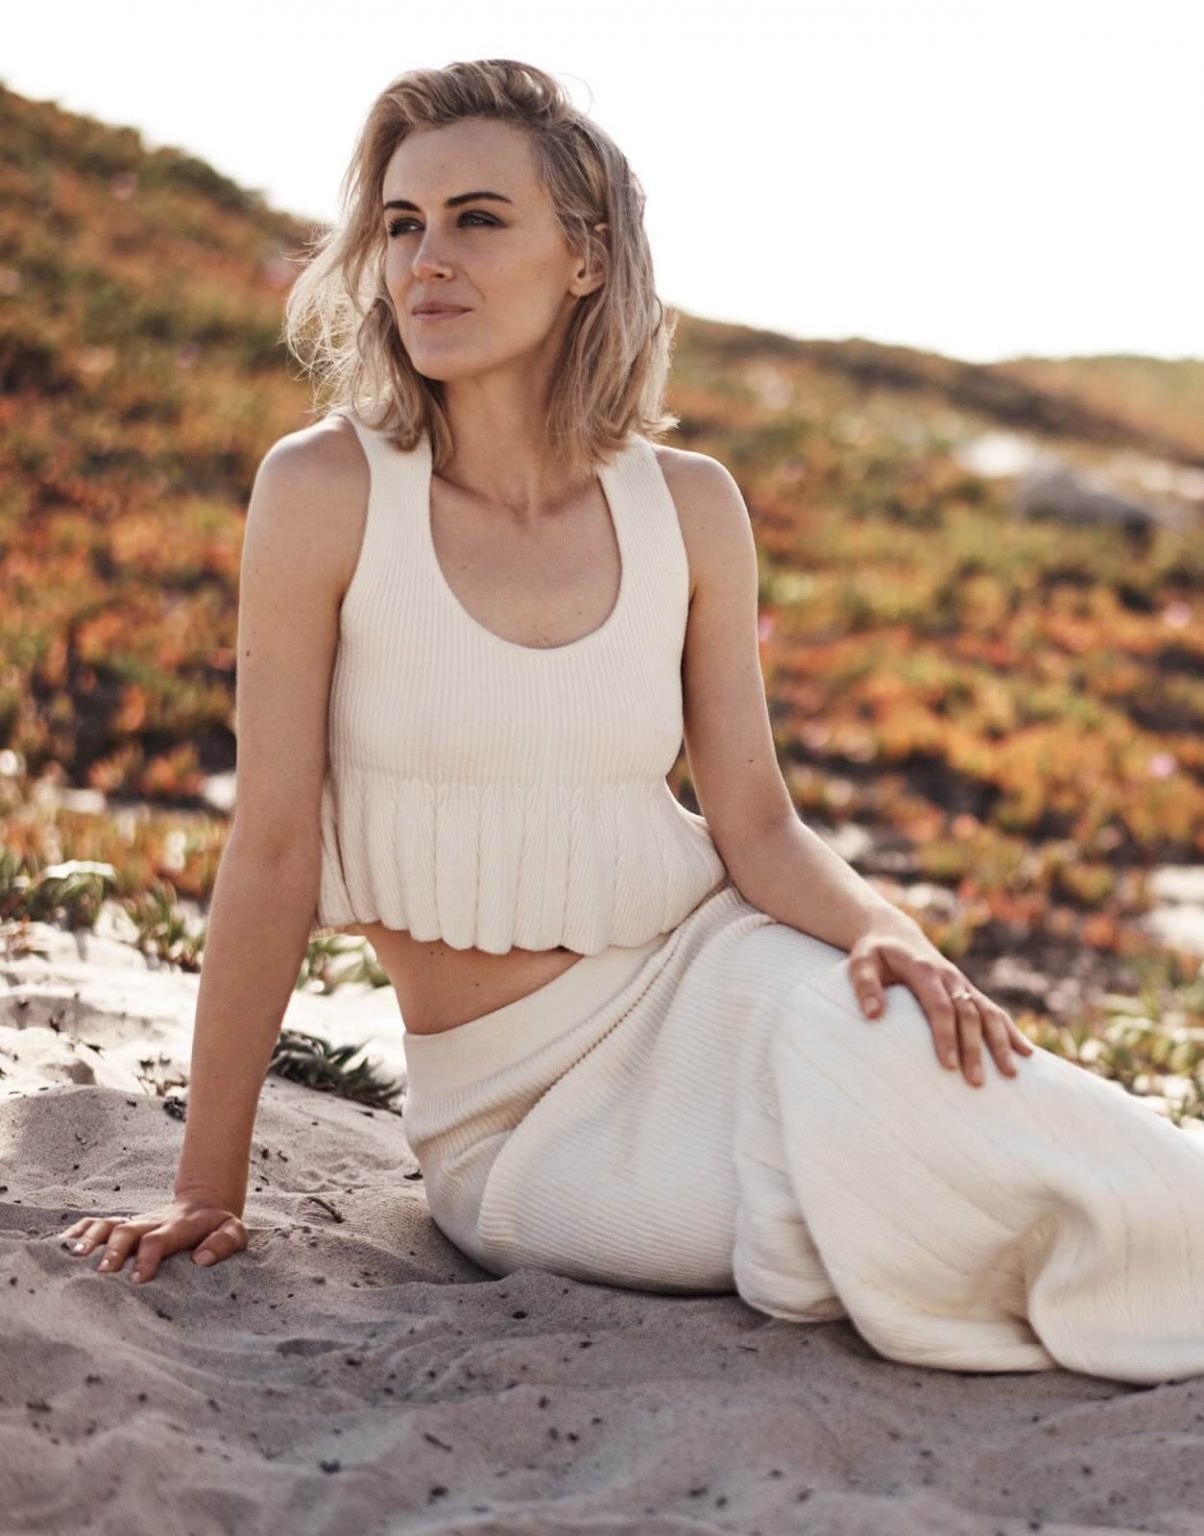 The Hottest Taylor Schilling Photos Around The Net - 12thBlo